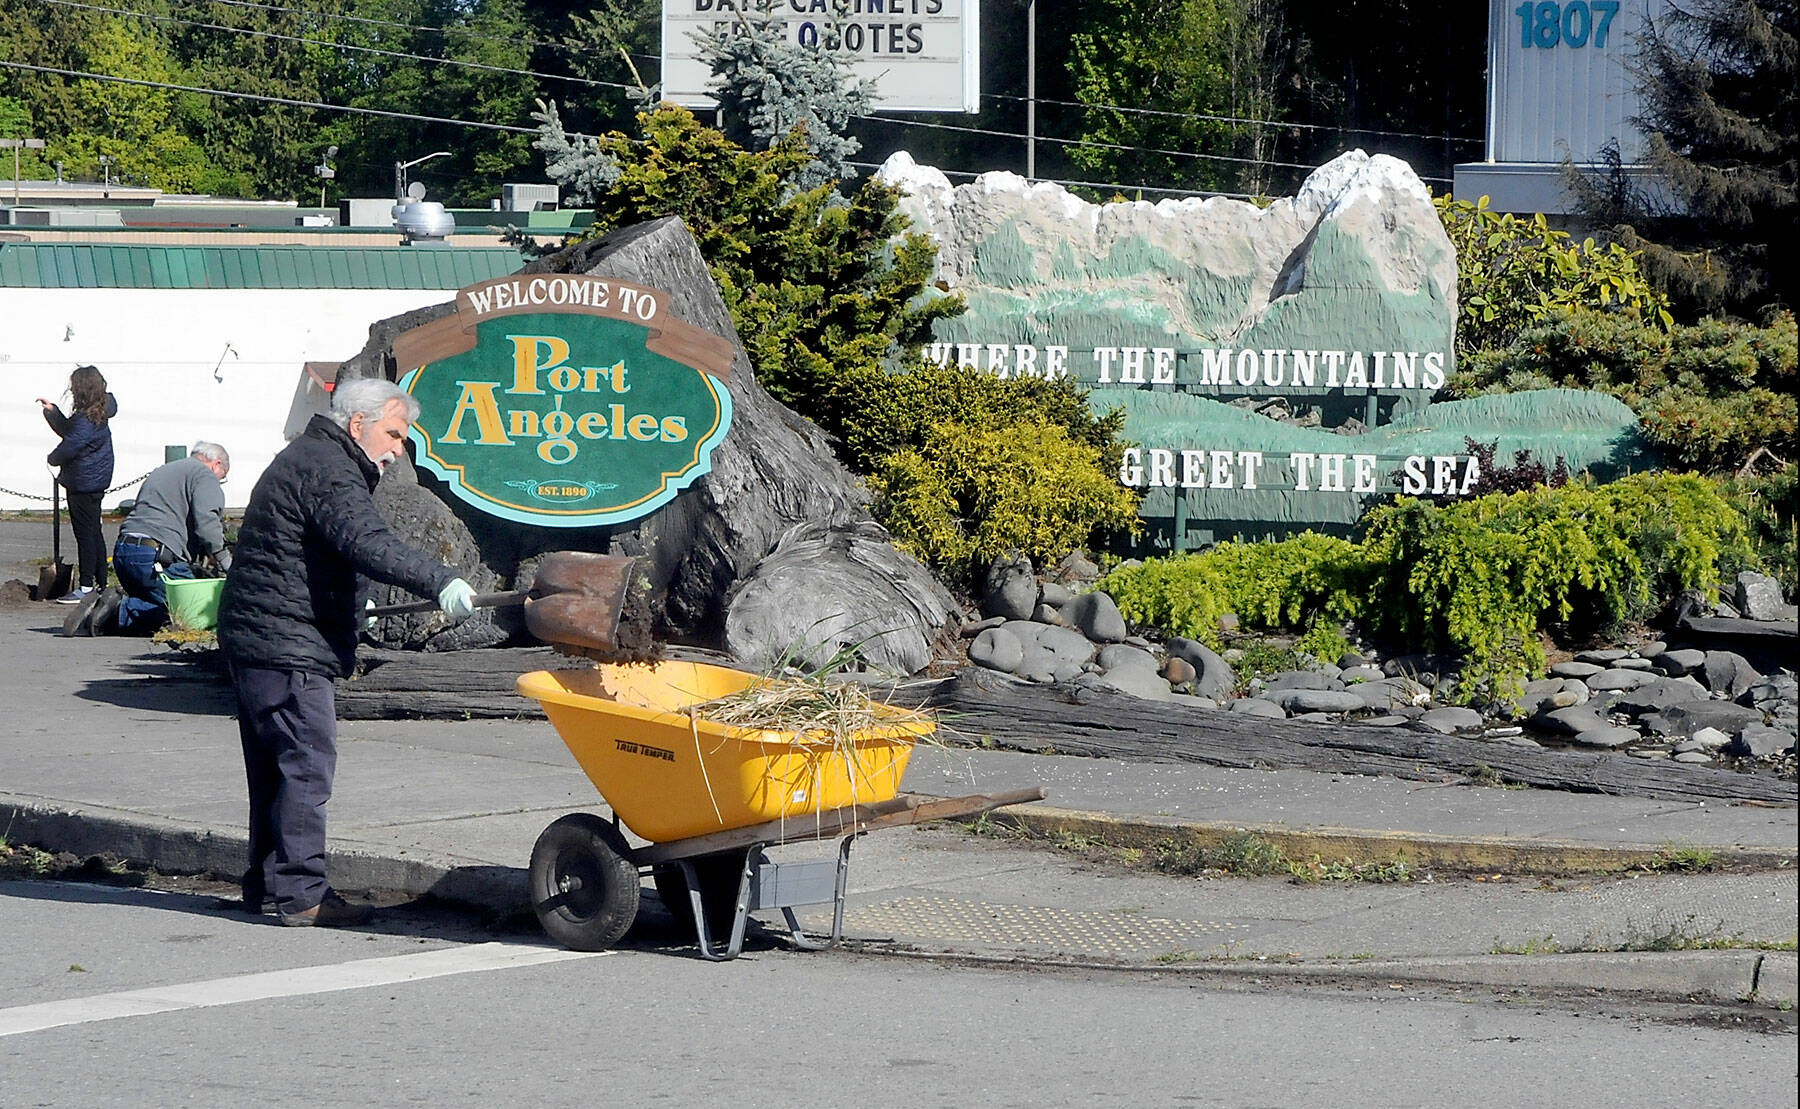 Port Angeles Business Association member John Brewer fills a wheelbarrow with weeds and dirt during a clean-up effort to beautify the Port Angeles welcome display Front Street and Ennis Cutoff on Saturday. (Keith Thorpe/Peninsula Daily News)